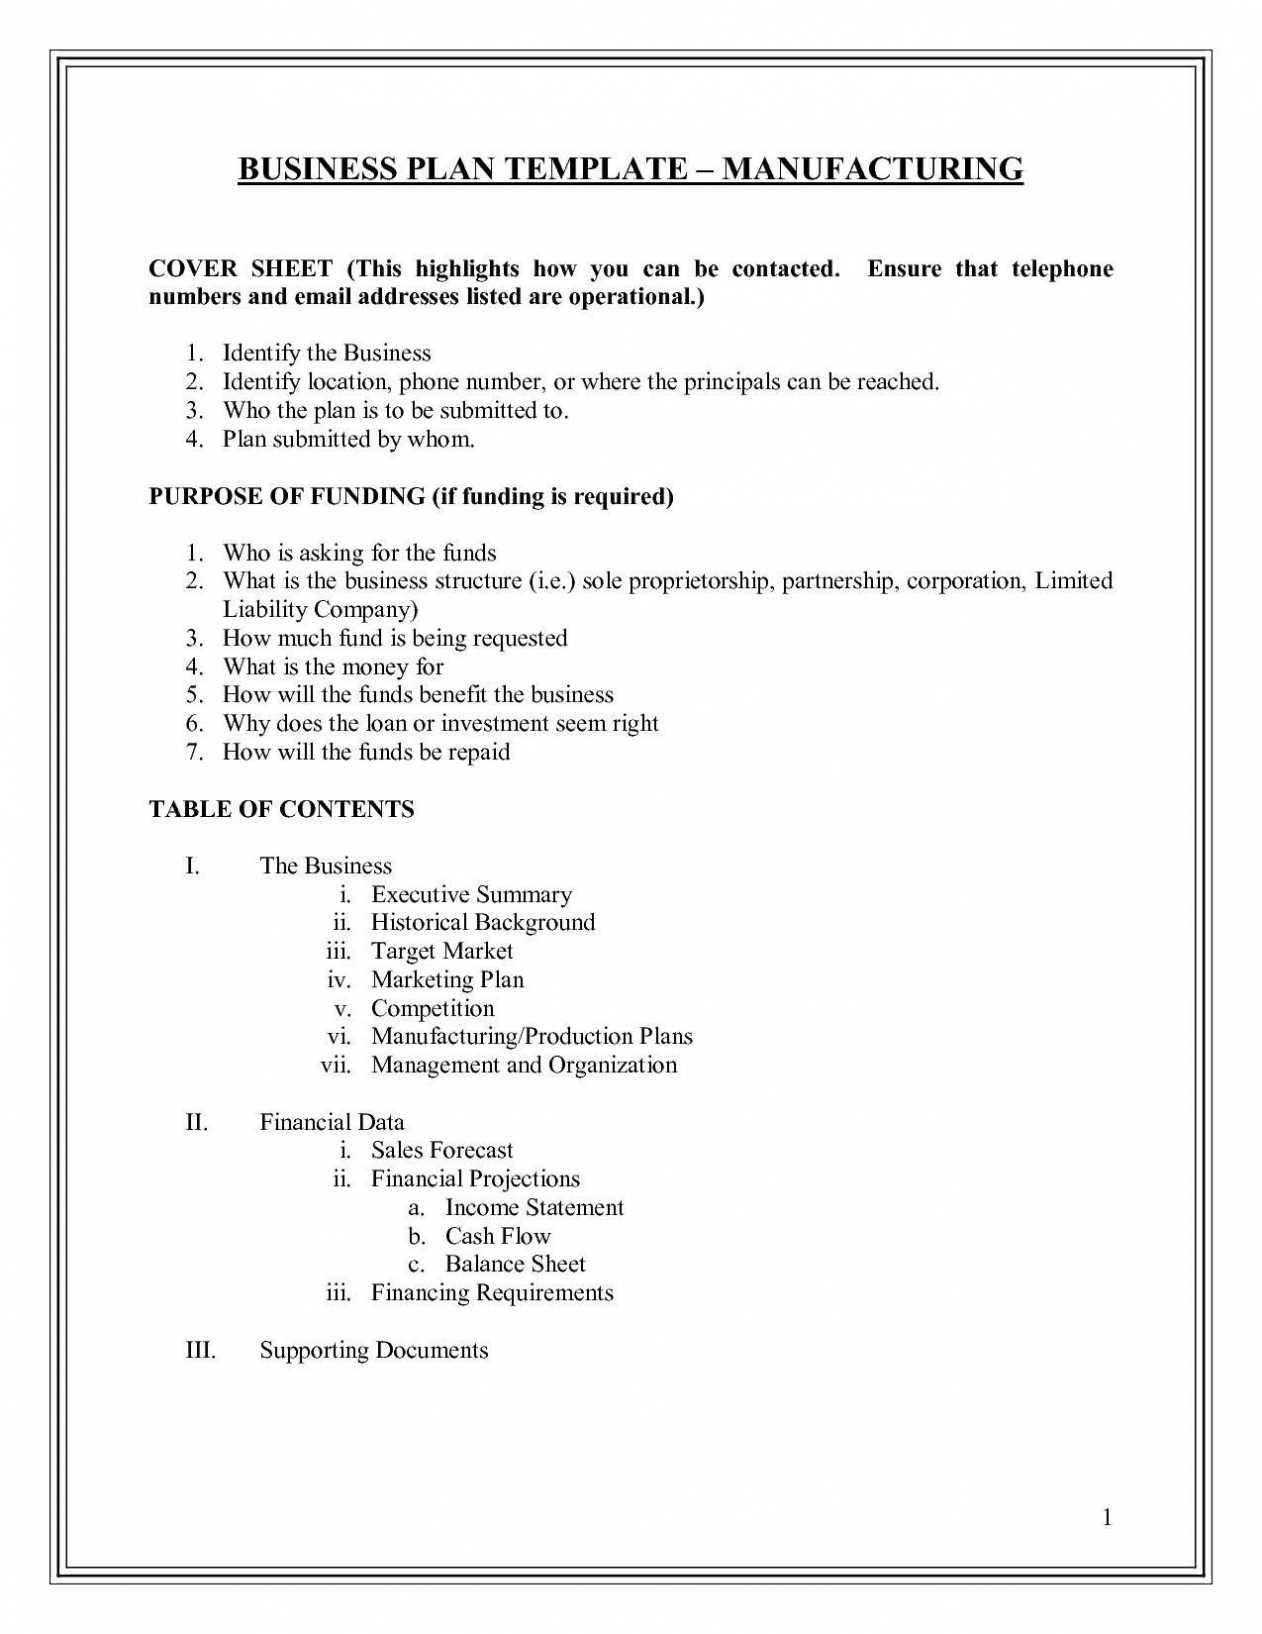 business plan template on poultry